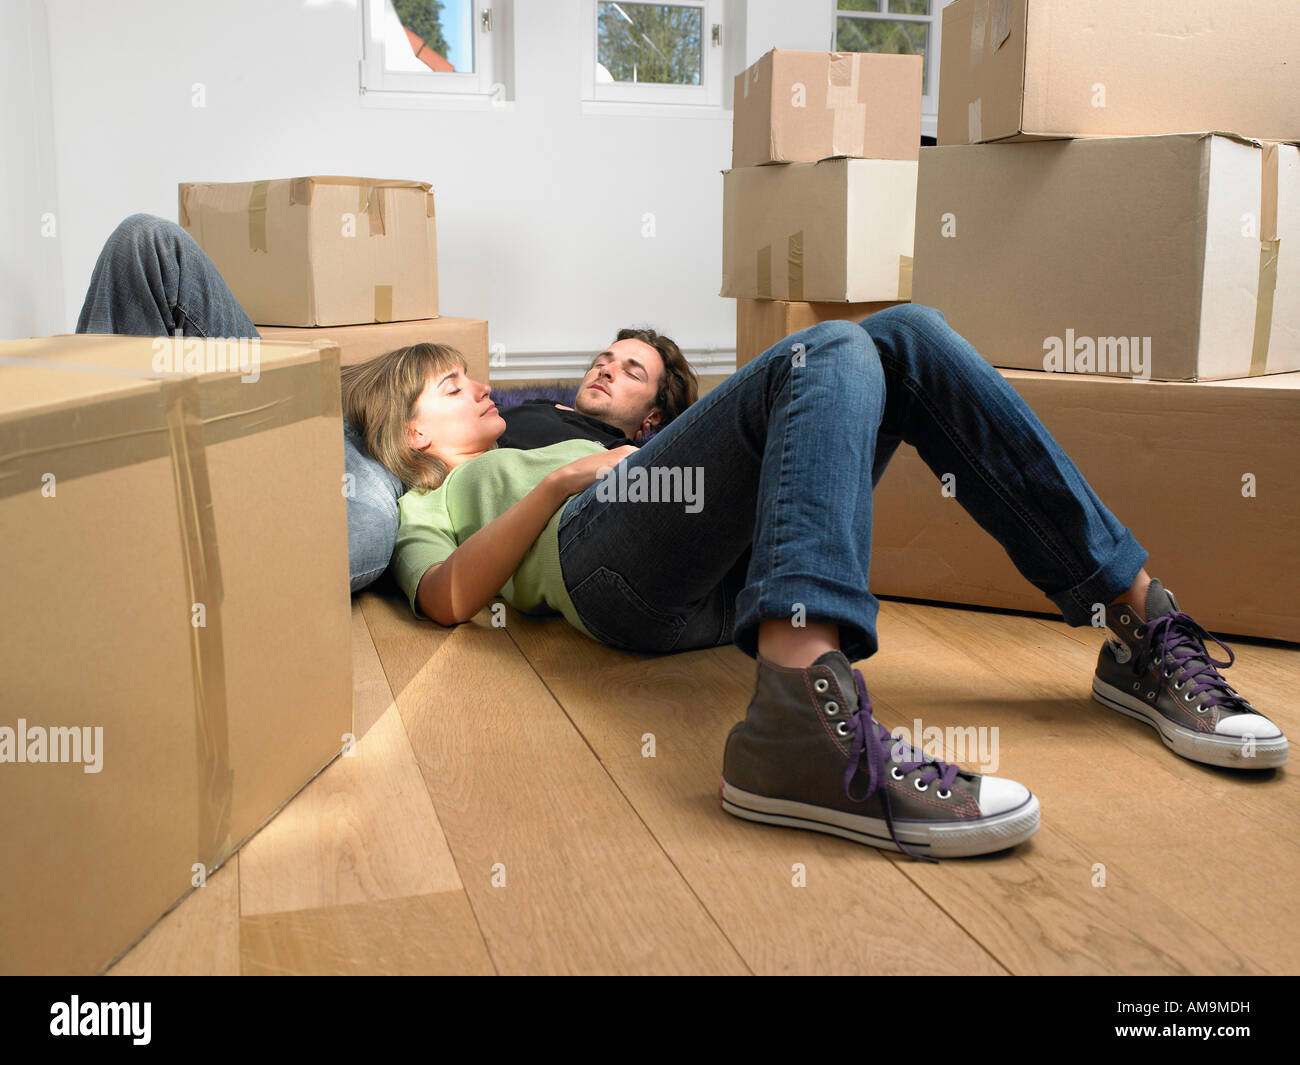 Couple sleeping on floor with moving boxes around them. Stock Photo